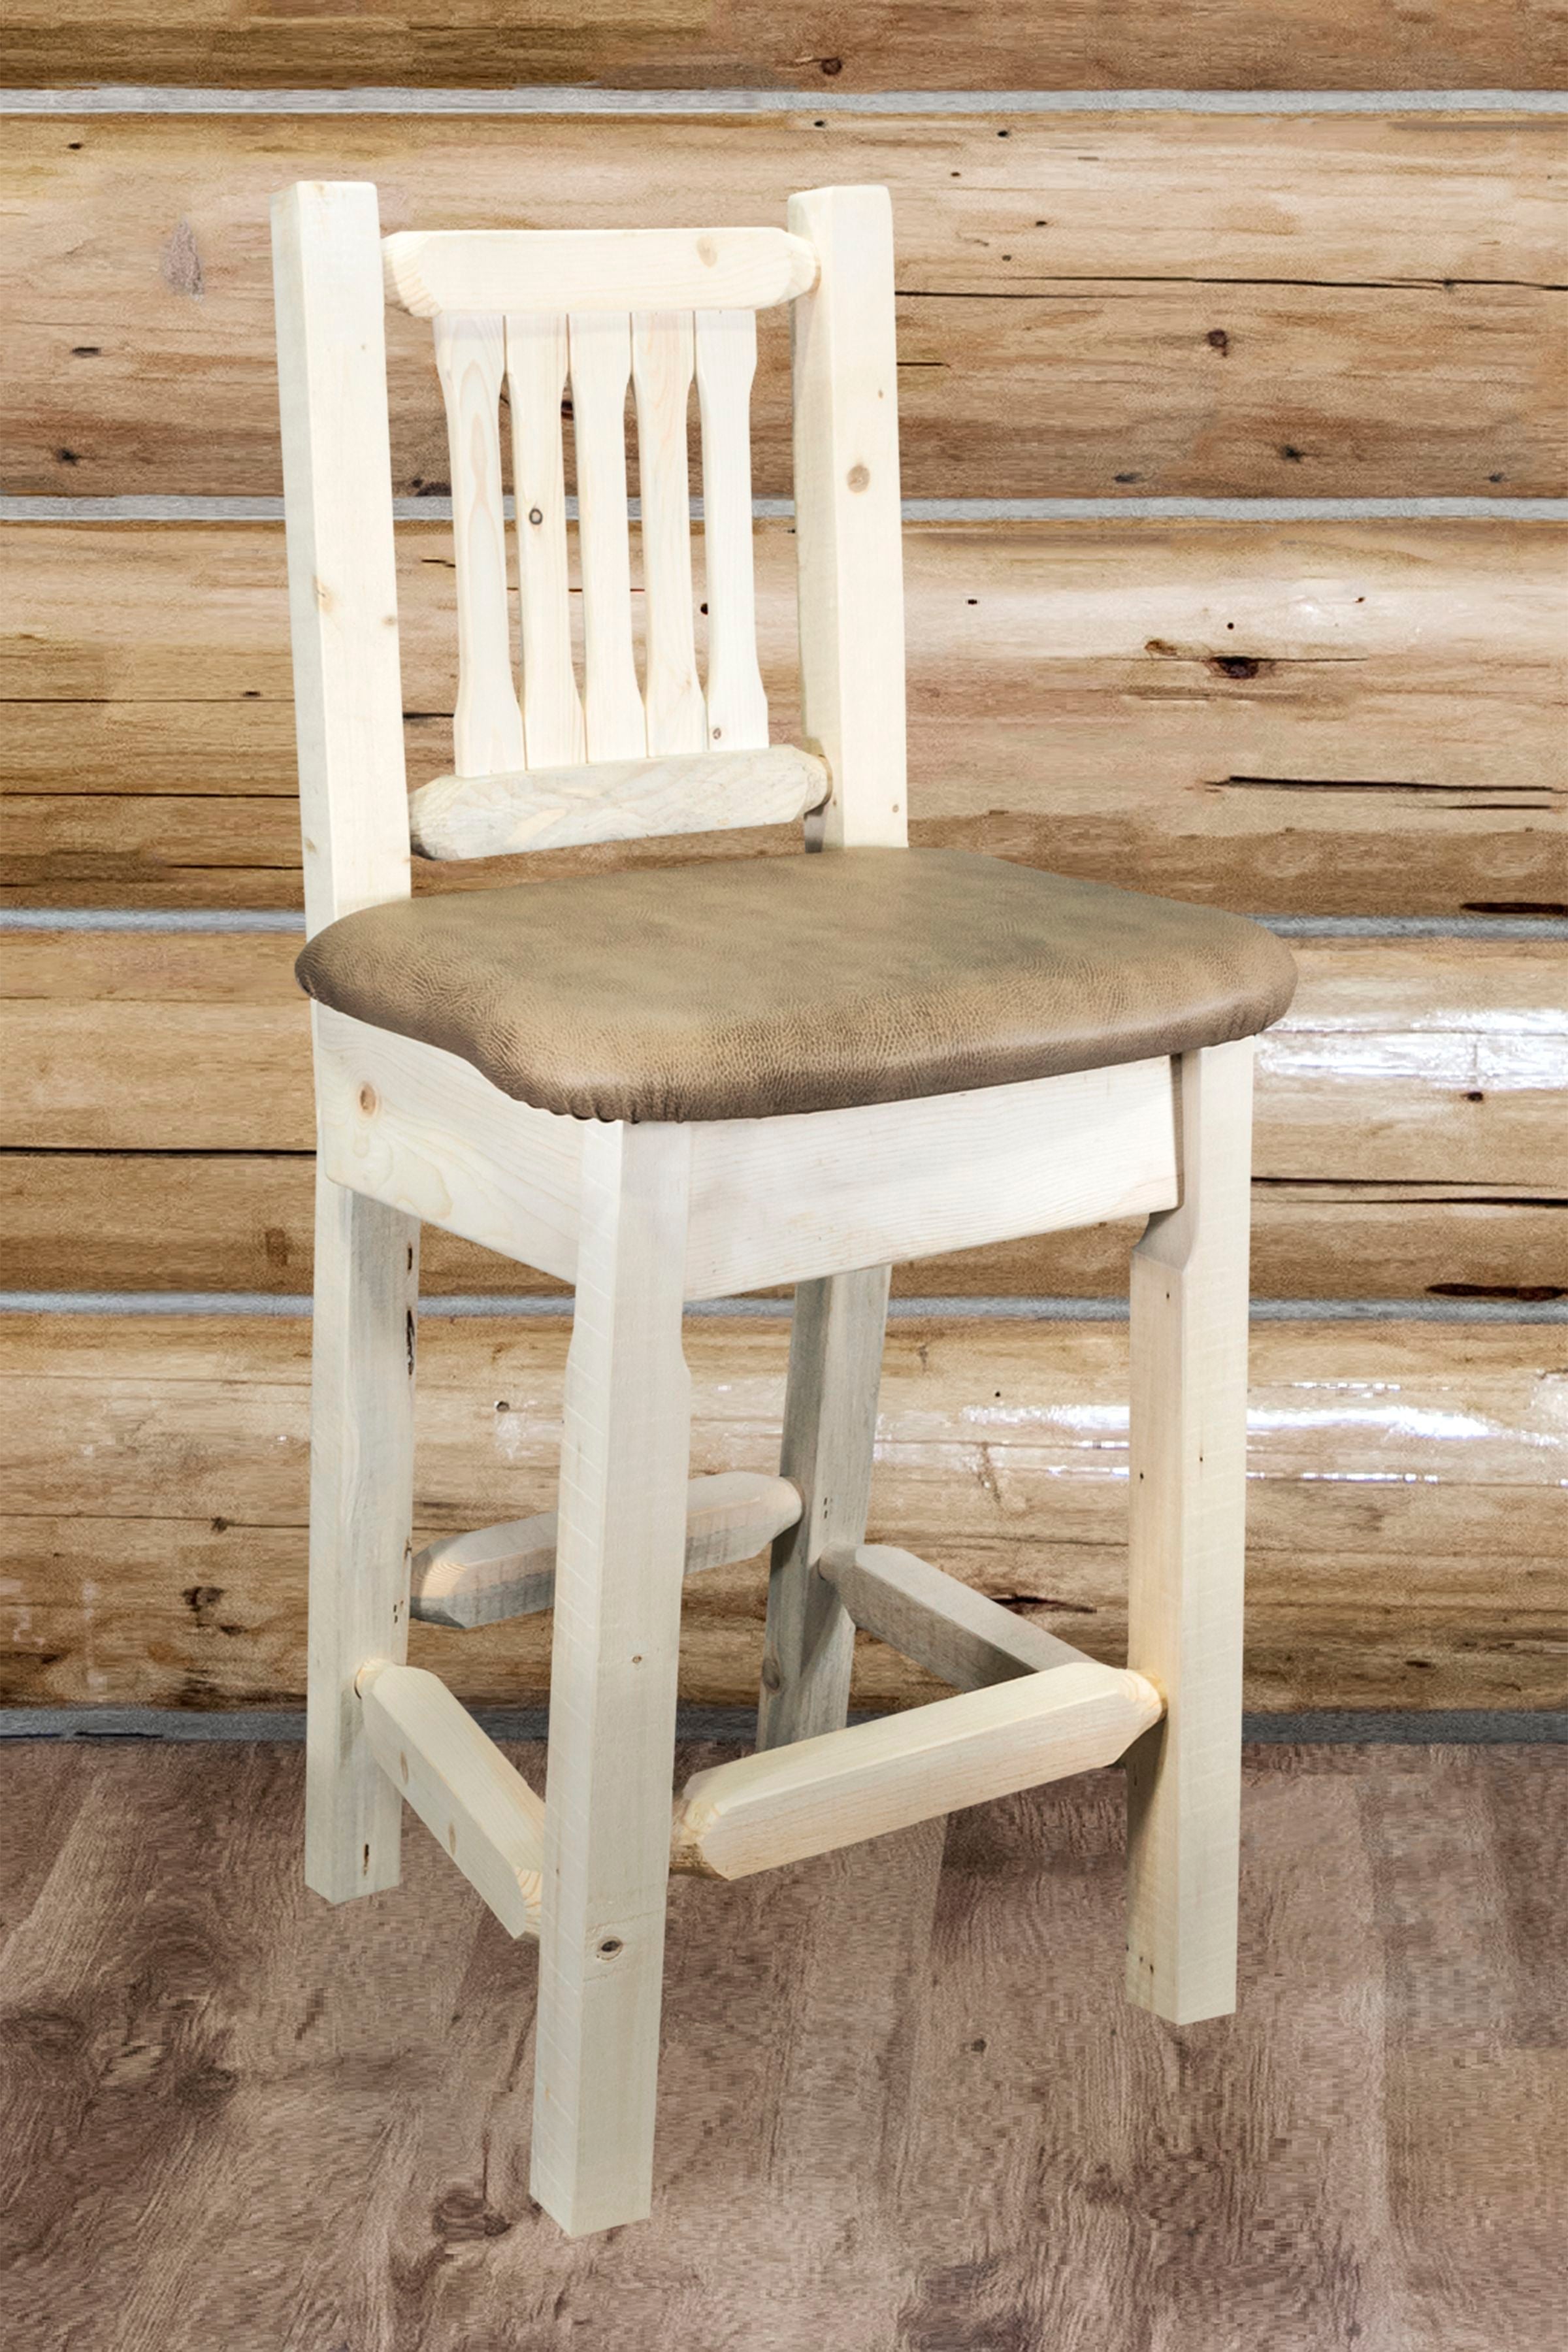 Montana Woodworks Homestead Collection Counter Height Barstool w/ Back - Buckskin Upholstery